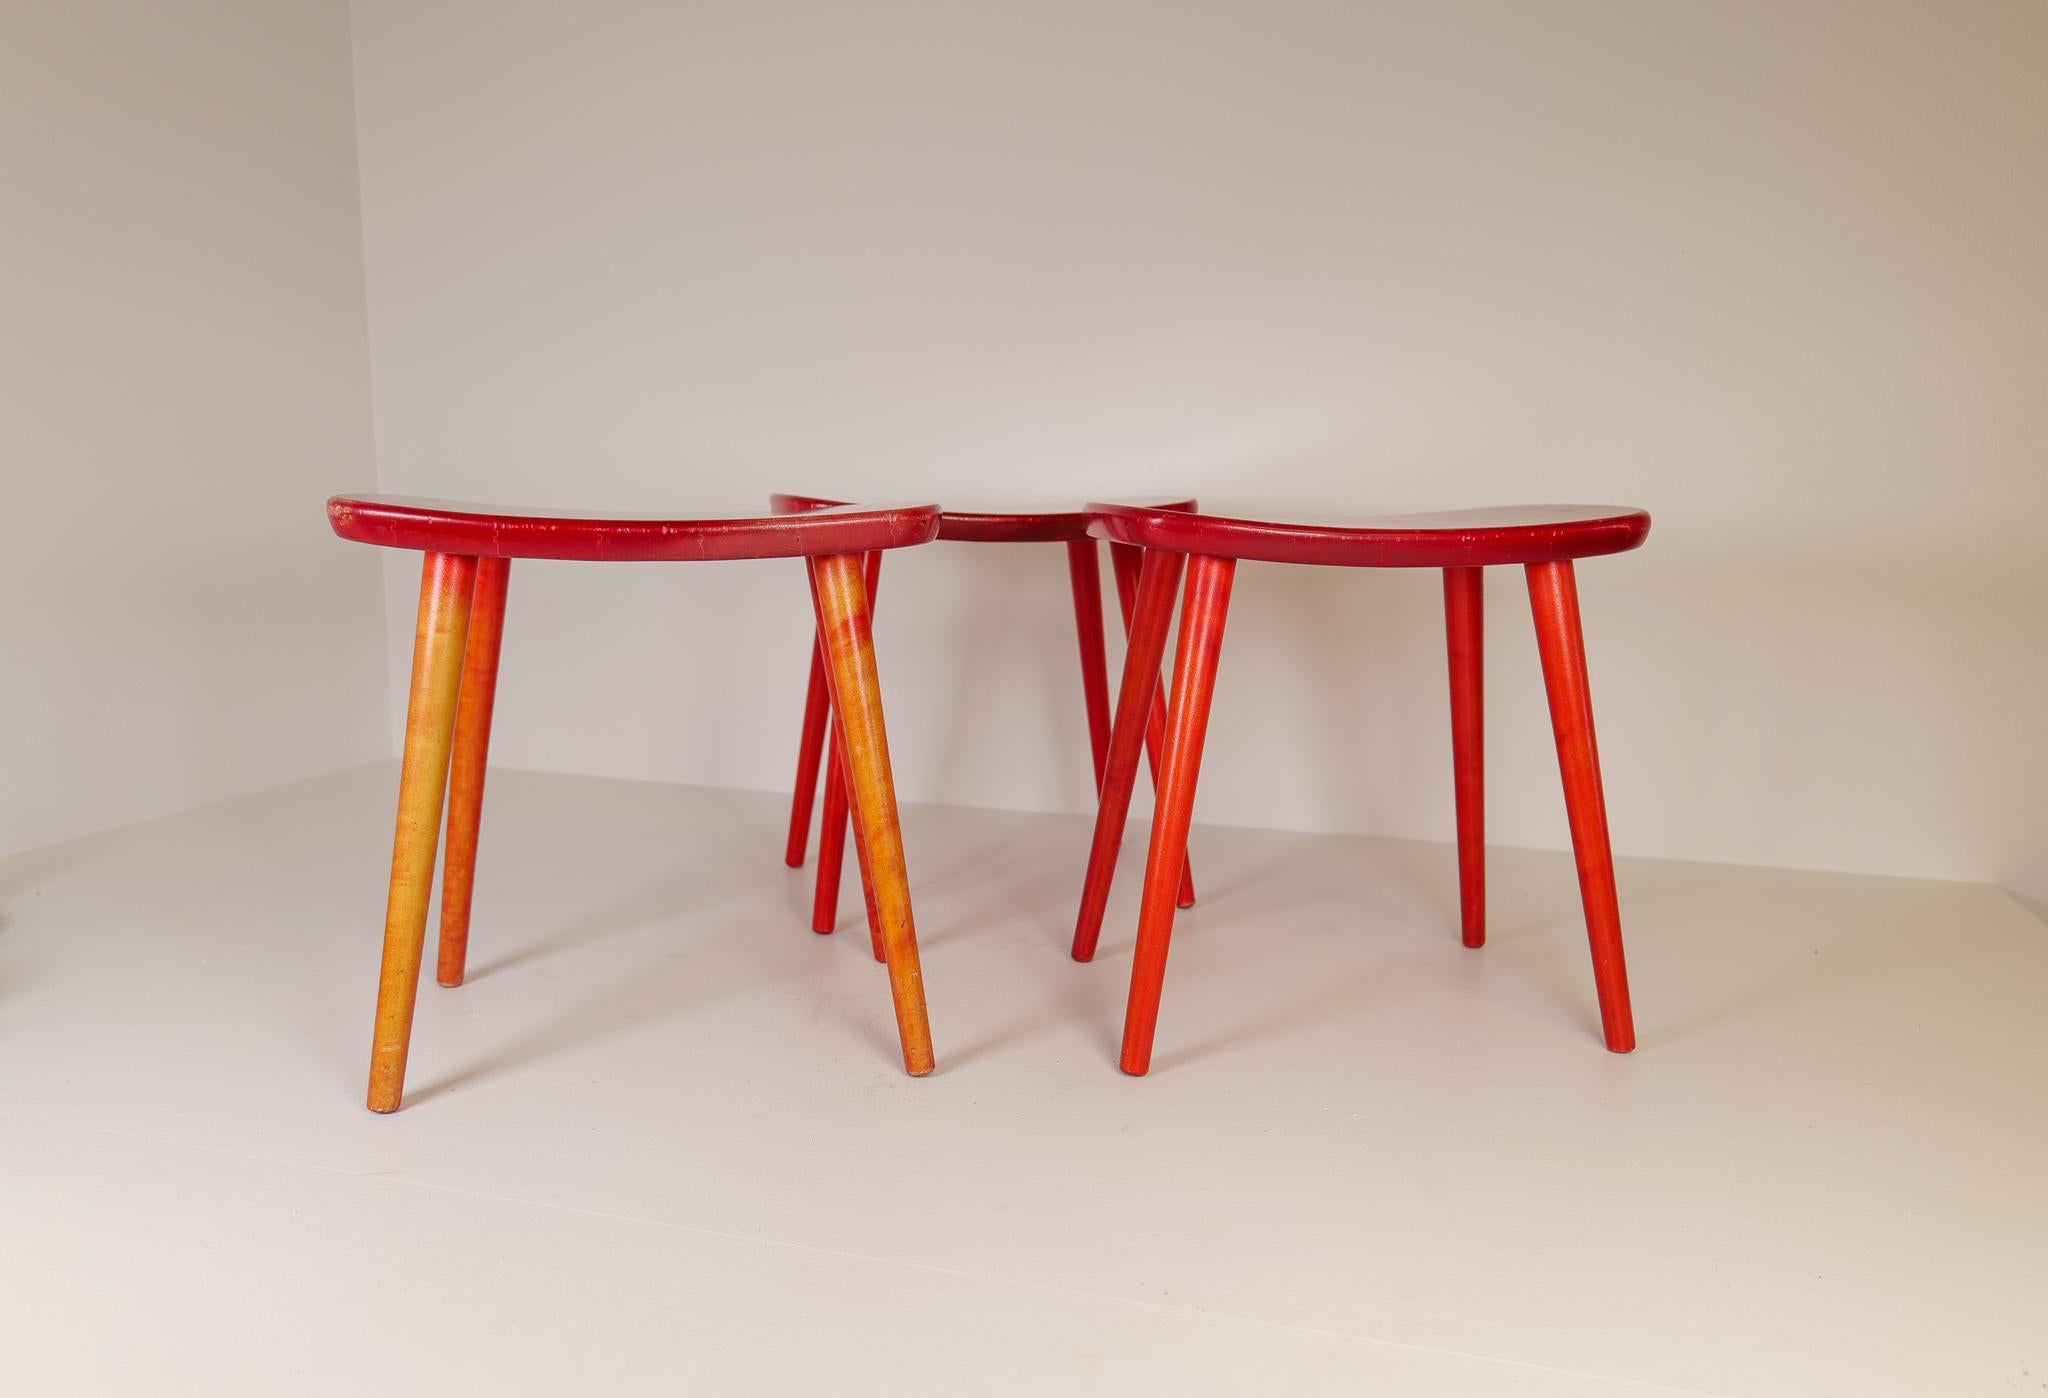 Birch stools in lacquered stylish red, produced in Sweden, 1970s designed by Yngve Ekström. 
These stools are a good example of the good craftsmanship and minimalistic style that signatures Scandinavian furniture. The stools have been gifted with